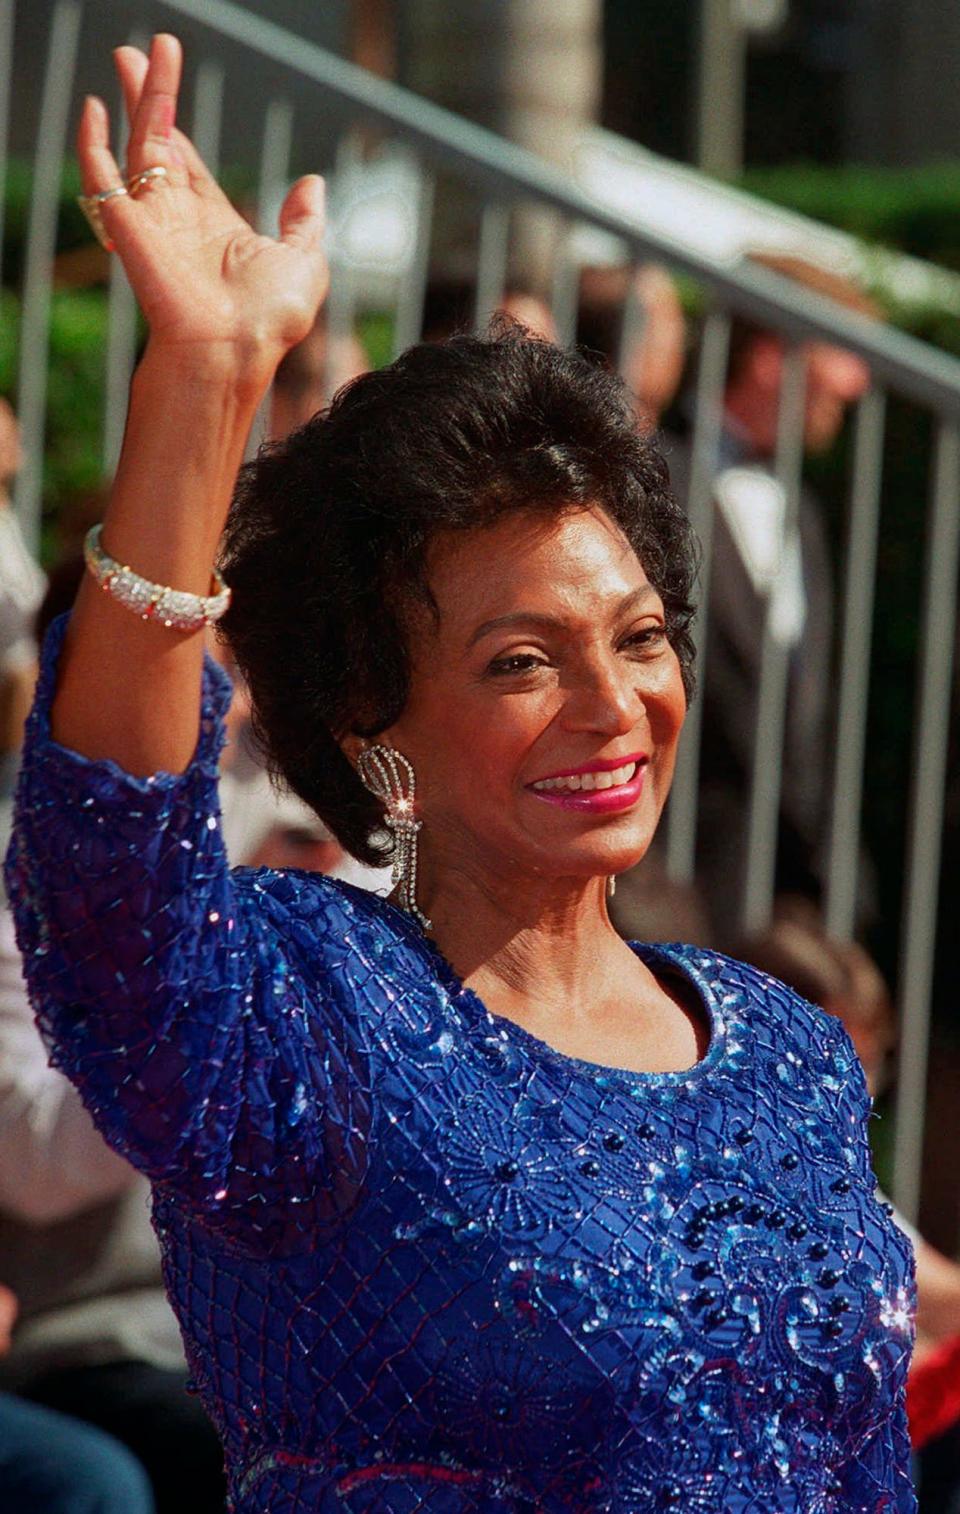 Actor Nichelle Nichols, who played Lt. Nyota Uhura on ''Star Trek,'' waves as she arrives at the "Star Trek: 30 Years and Beyond" tribute at Paramount Studios in Los Angeles on Oct. 6, 1996.